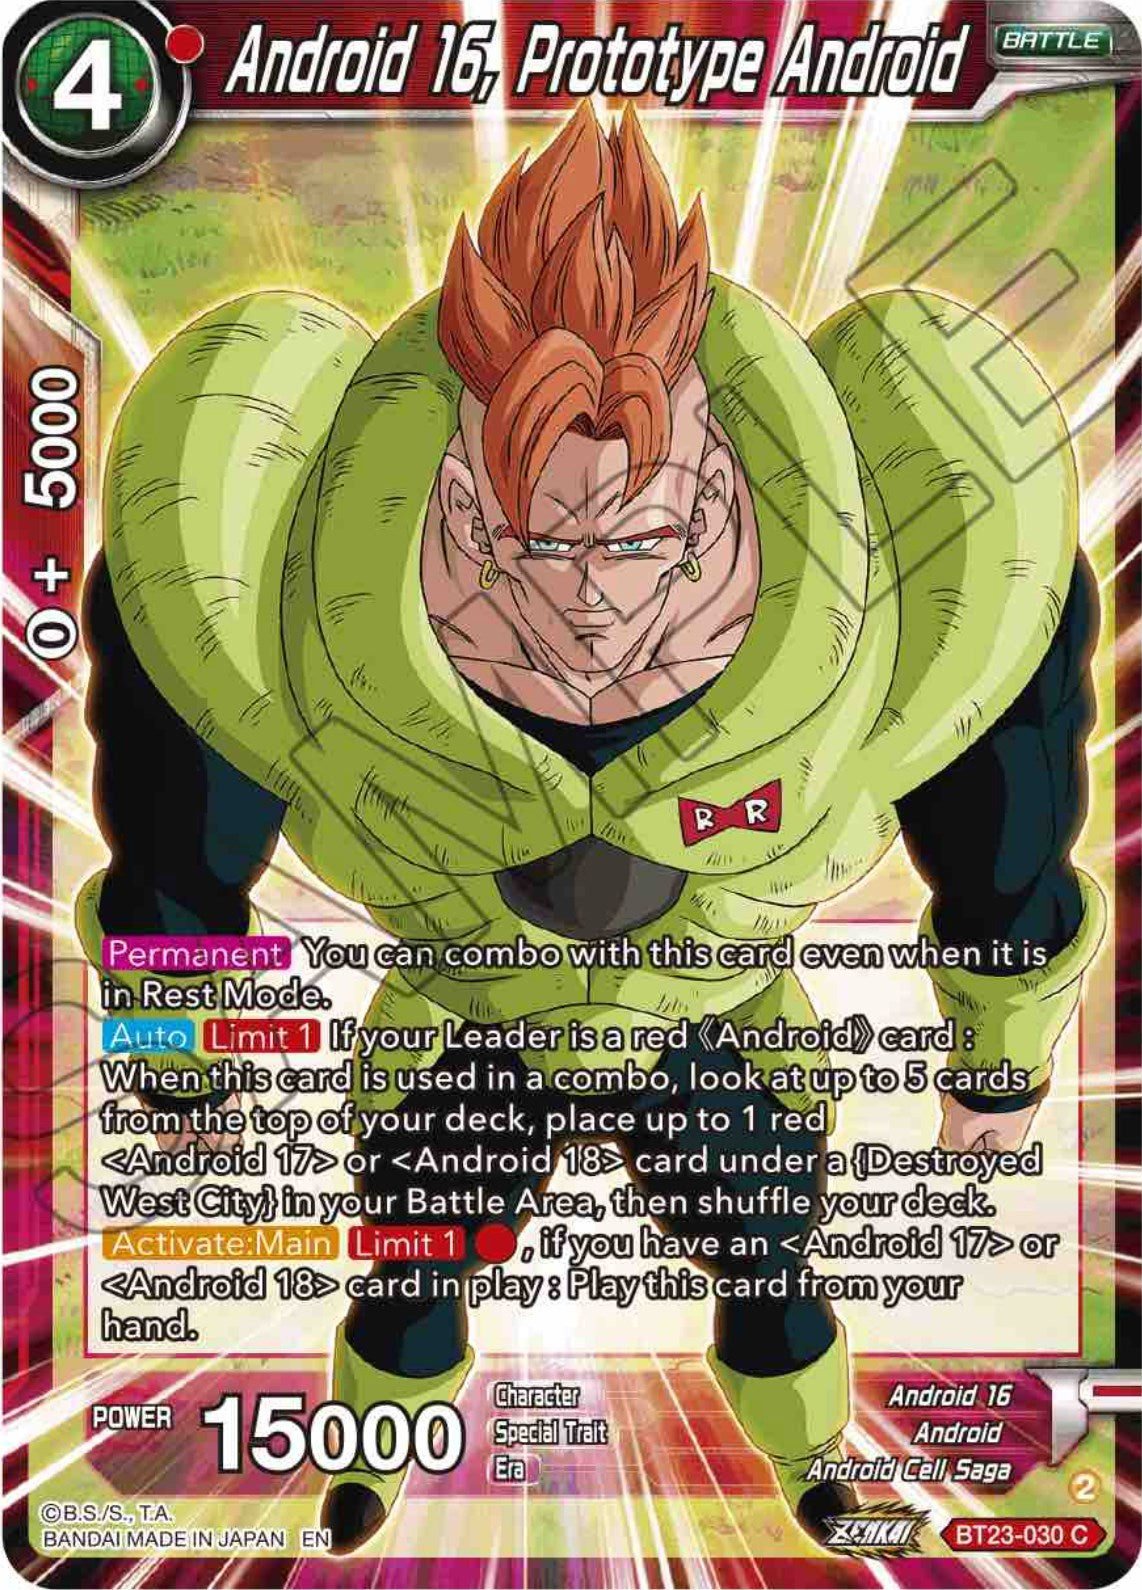 Android 16, Prototype Android (BT23-030) [Perfect Combination] | Mindsight Gaming